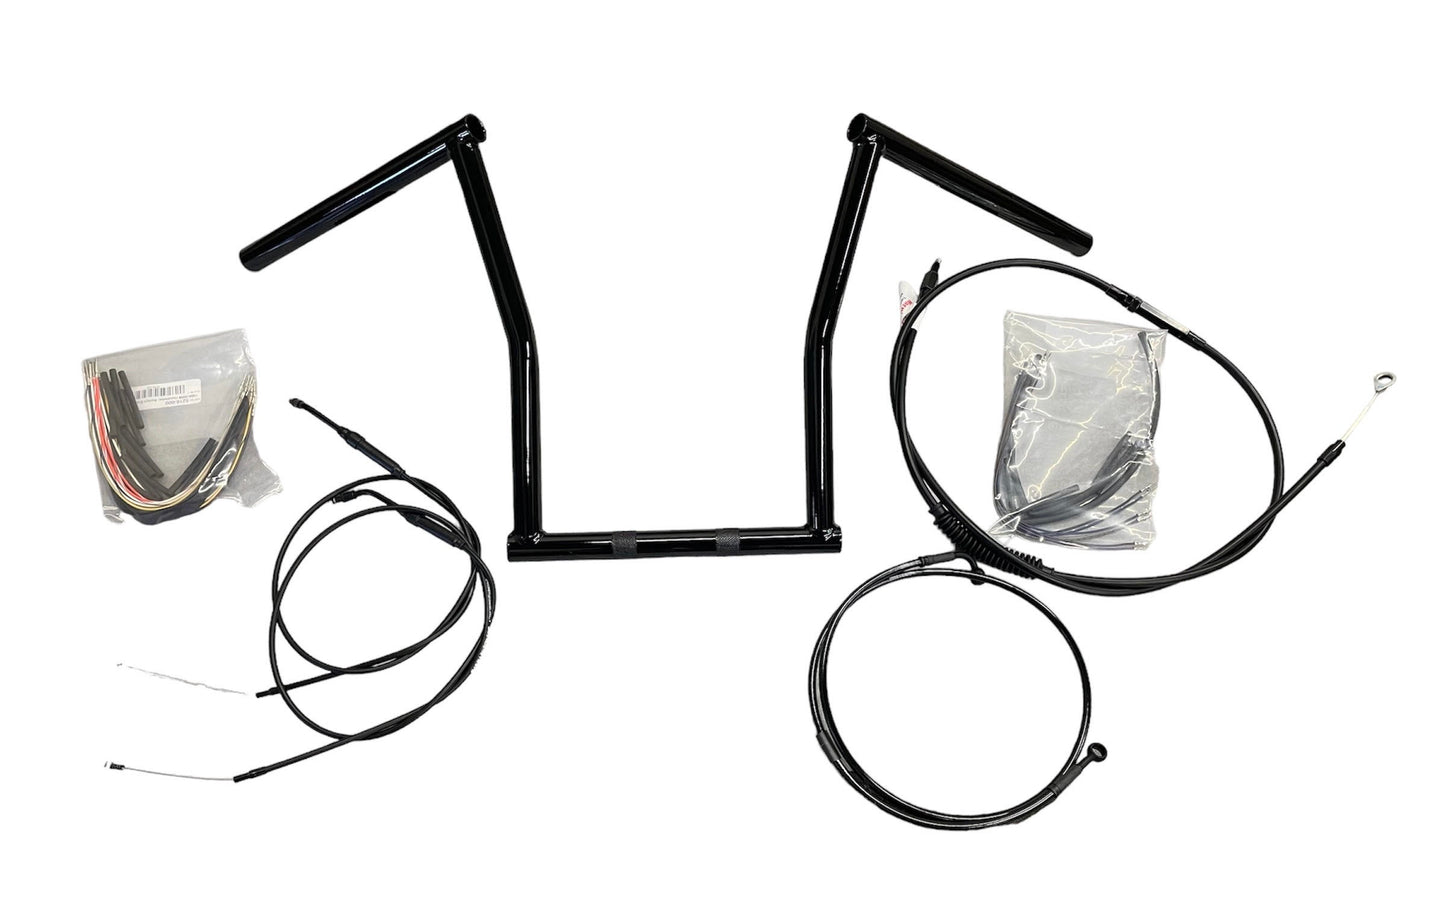 NAKED handlebars & cable kit for 1996-2017 Dyna(FXD)